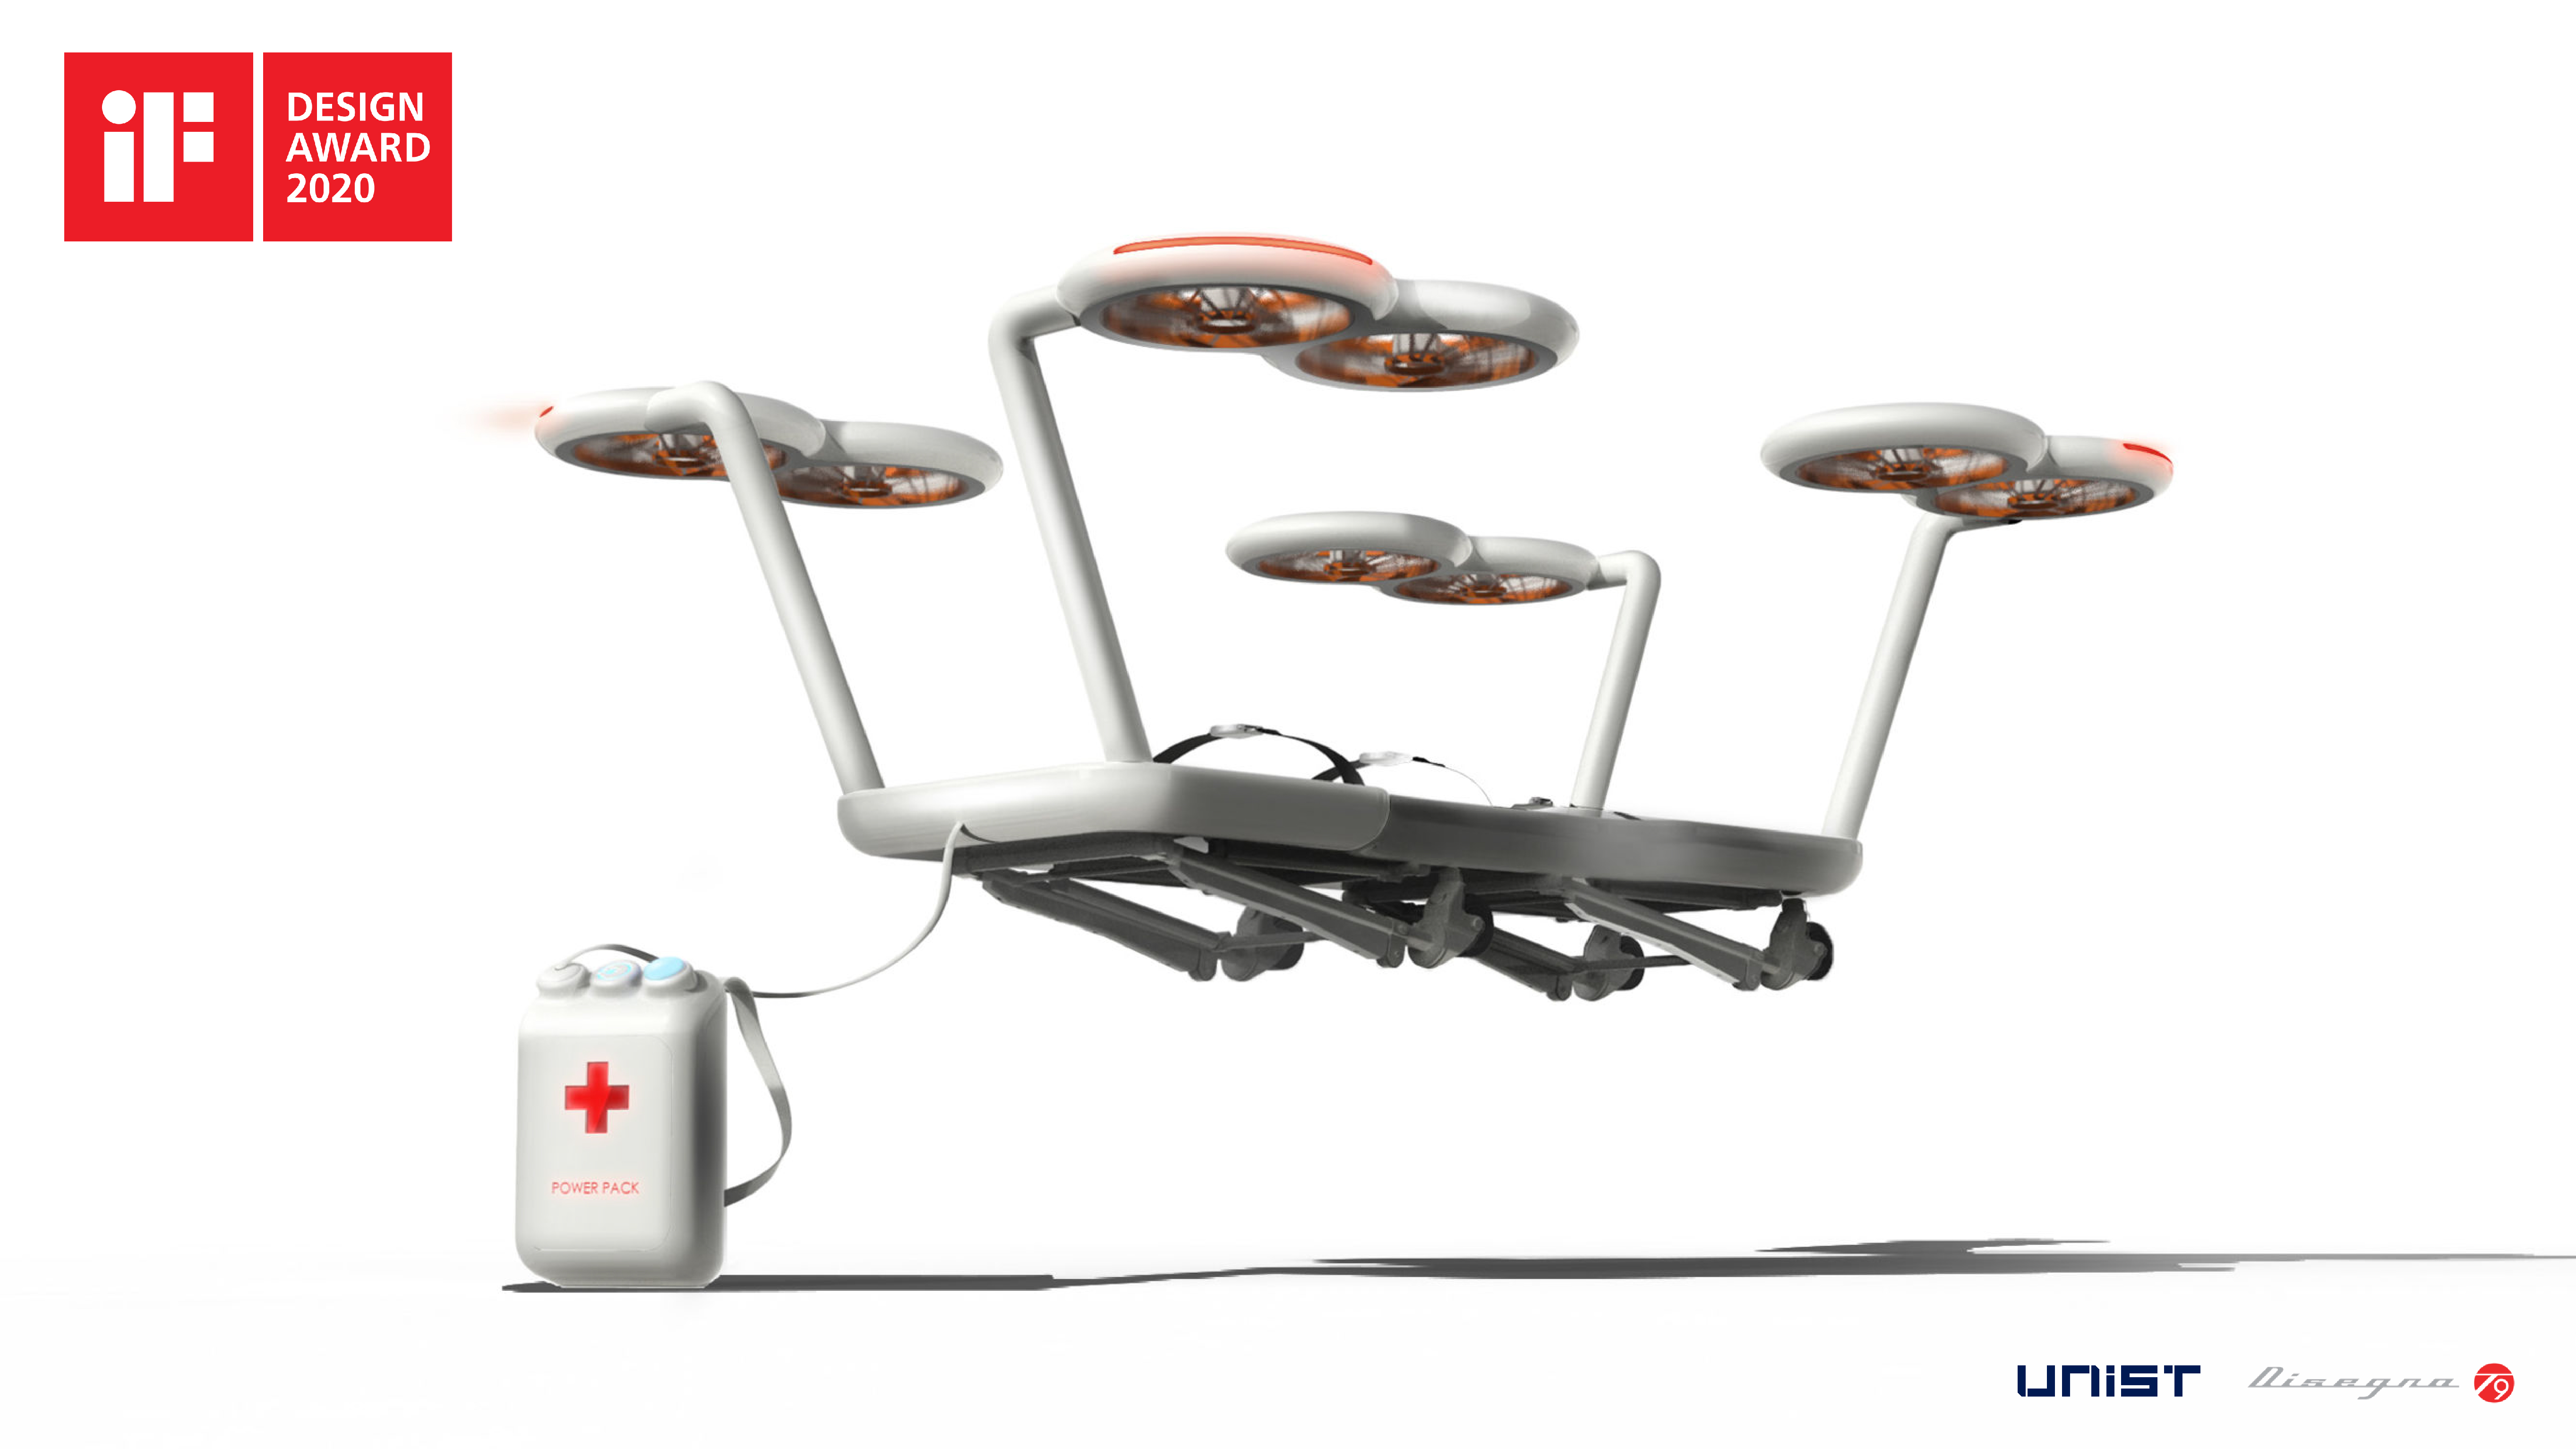 911$ Rescue Drone by Professor Yunwoo Jeong's design team